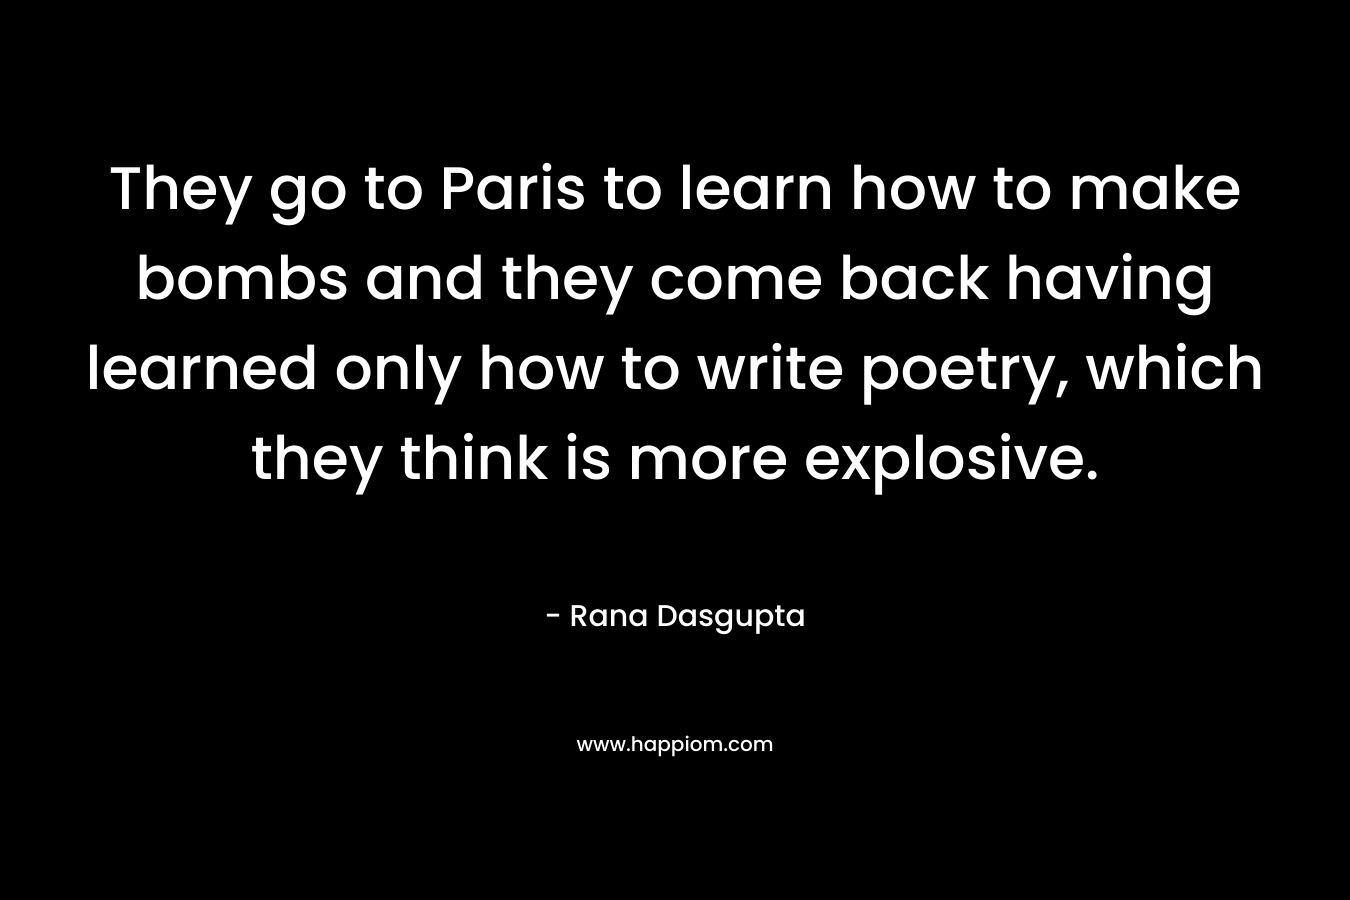 They go to Paris to learn how to make bombs and they come back having learned only how to write poetry, which they think is more explosive. – Rana Dasgupta